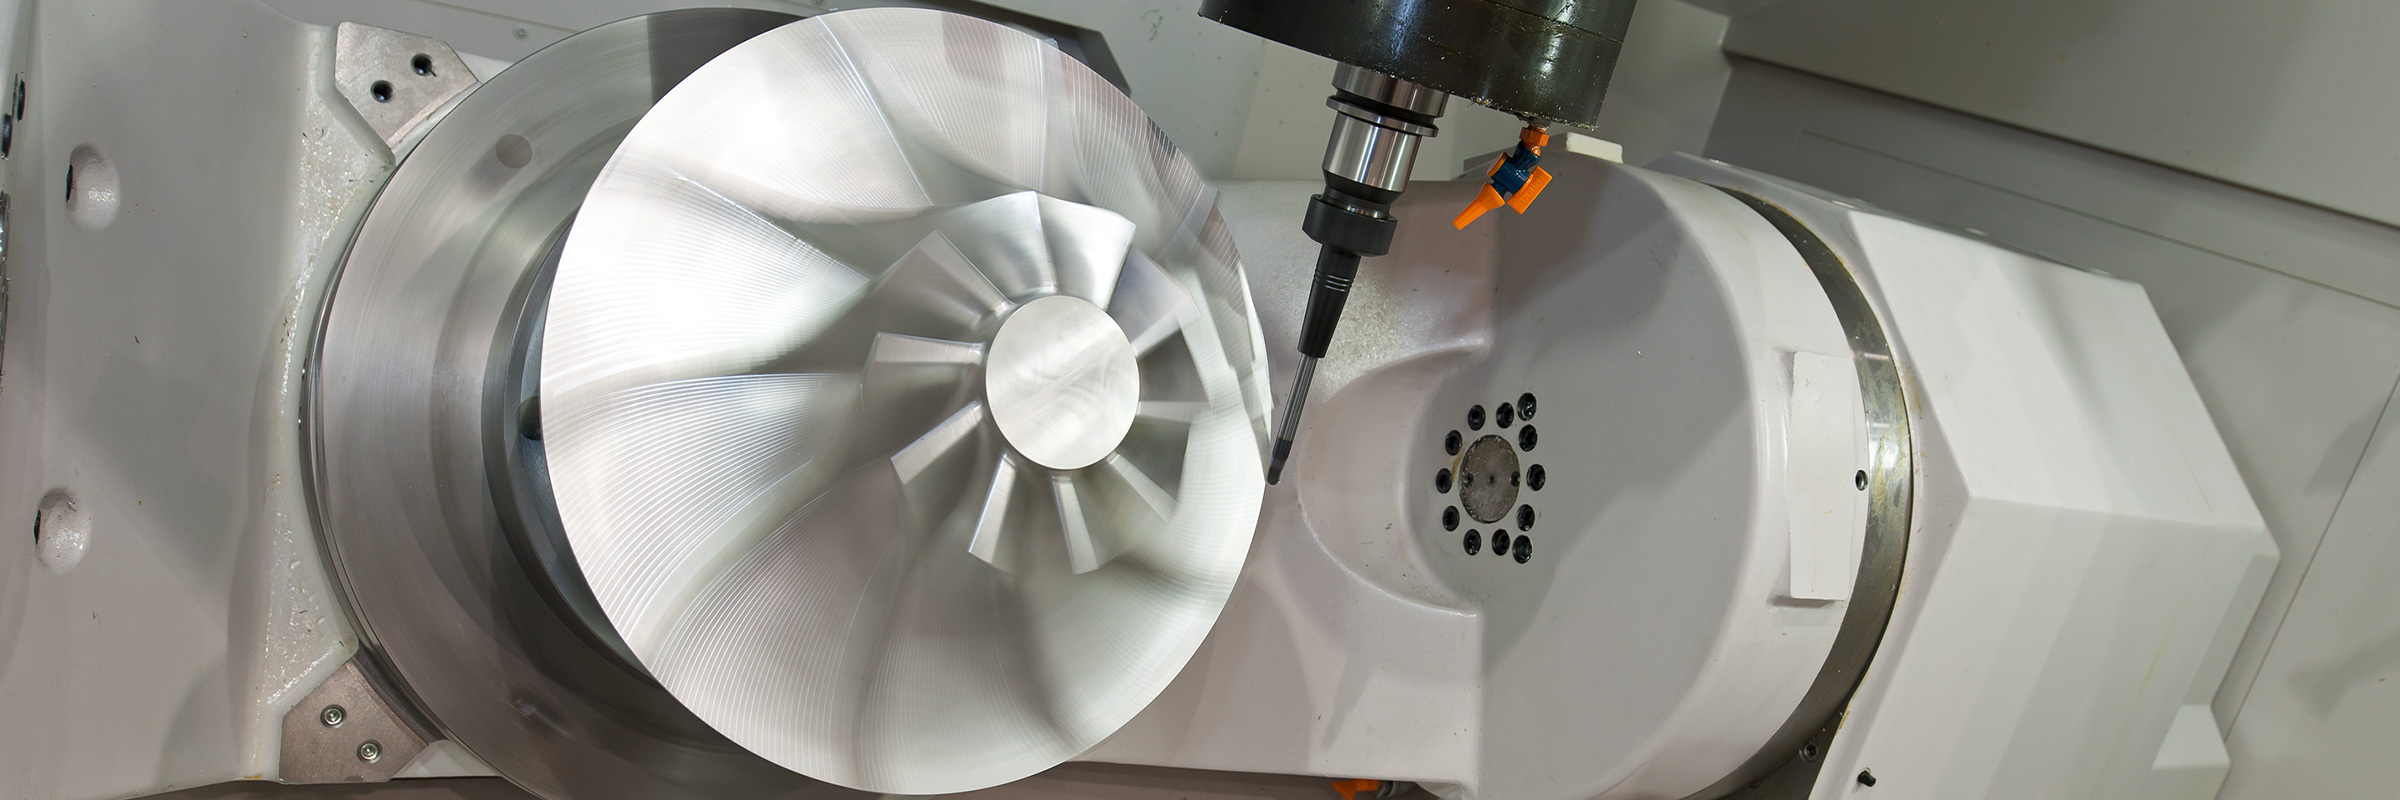 How Much Does a 5-Axis Machine Tool Cost?